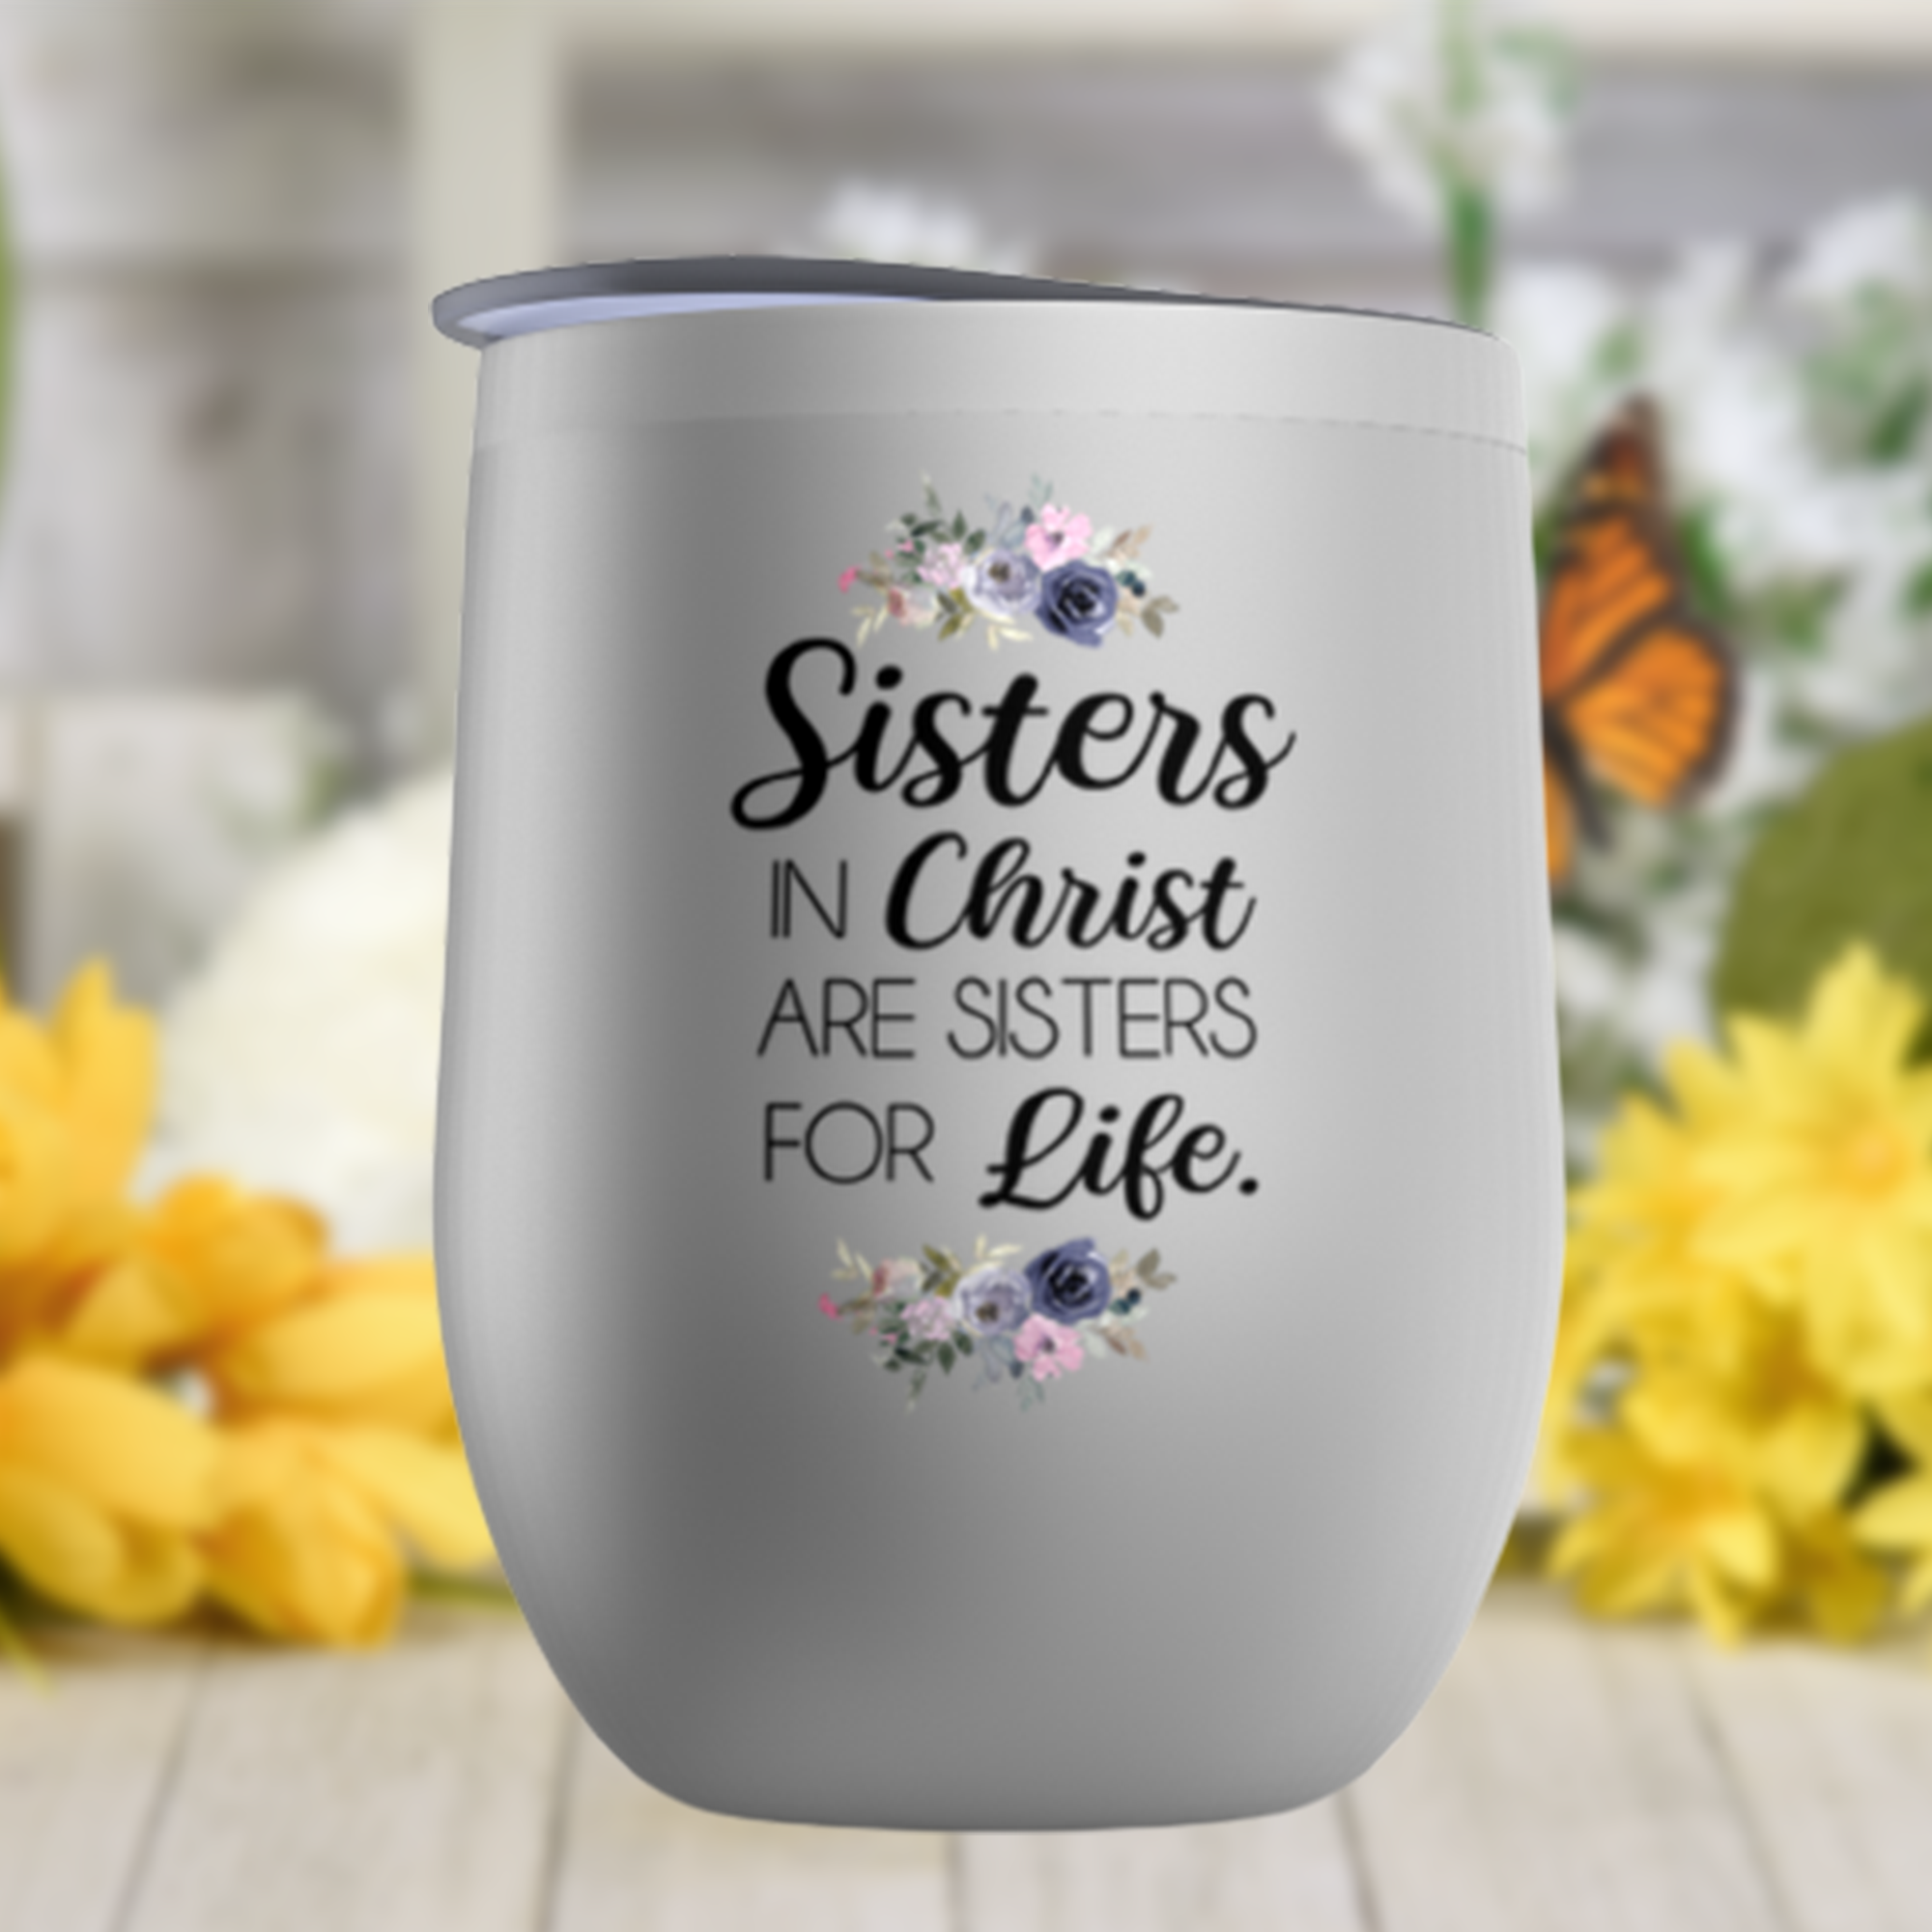 Thoughtful Christian Based Gifts – Liliana and Liam